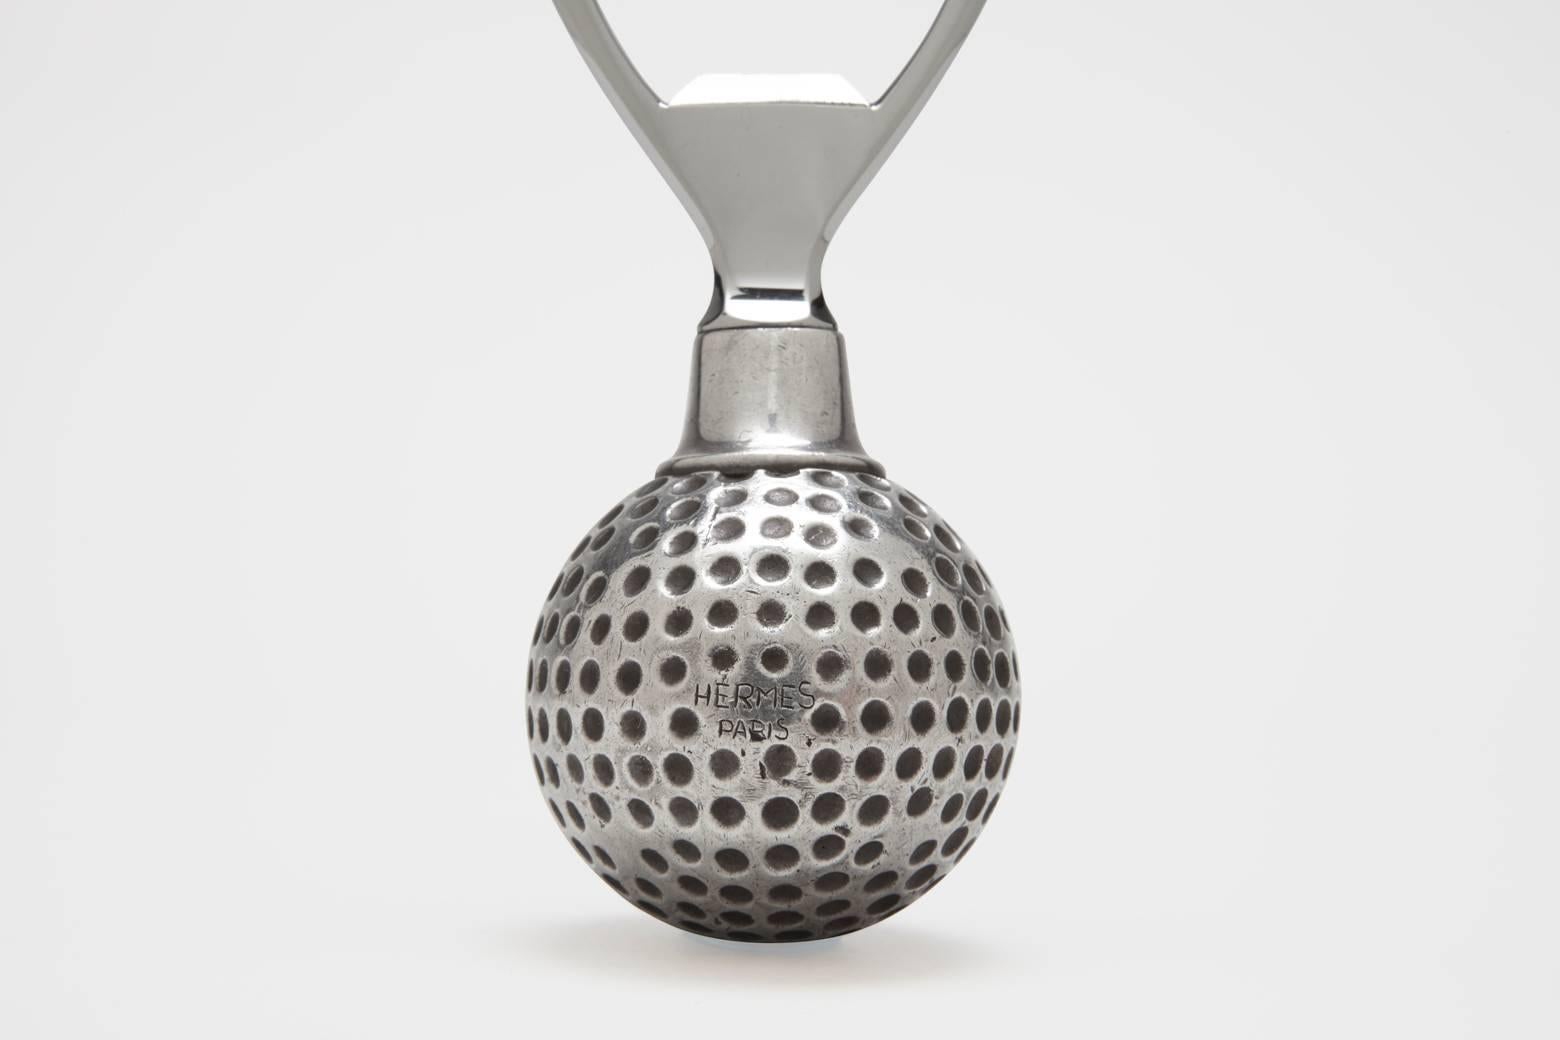 A stainless steel and silver plated bottle opener, with the handle in the form of a fully three dimensional golf ball. This is a fantastic bar piece, and quite rare. Wonderful in the hand, very sturdy and a great conversational piece. It is made in